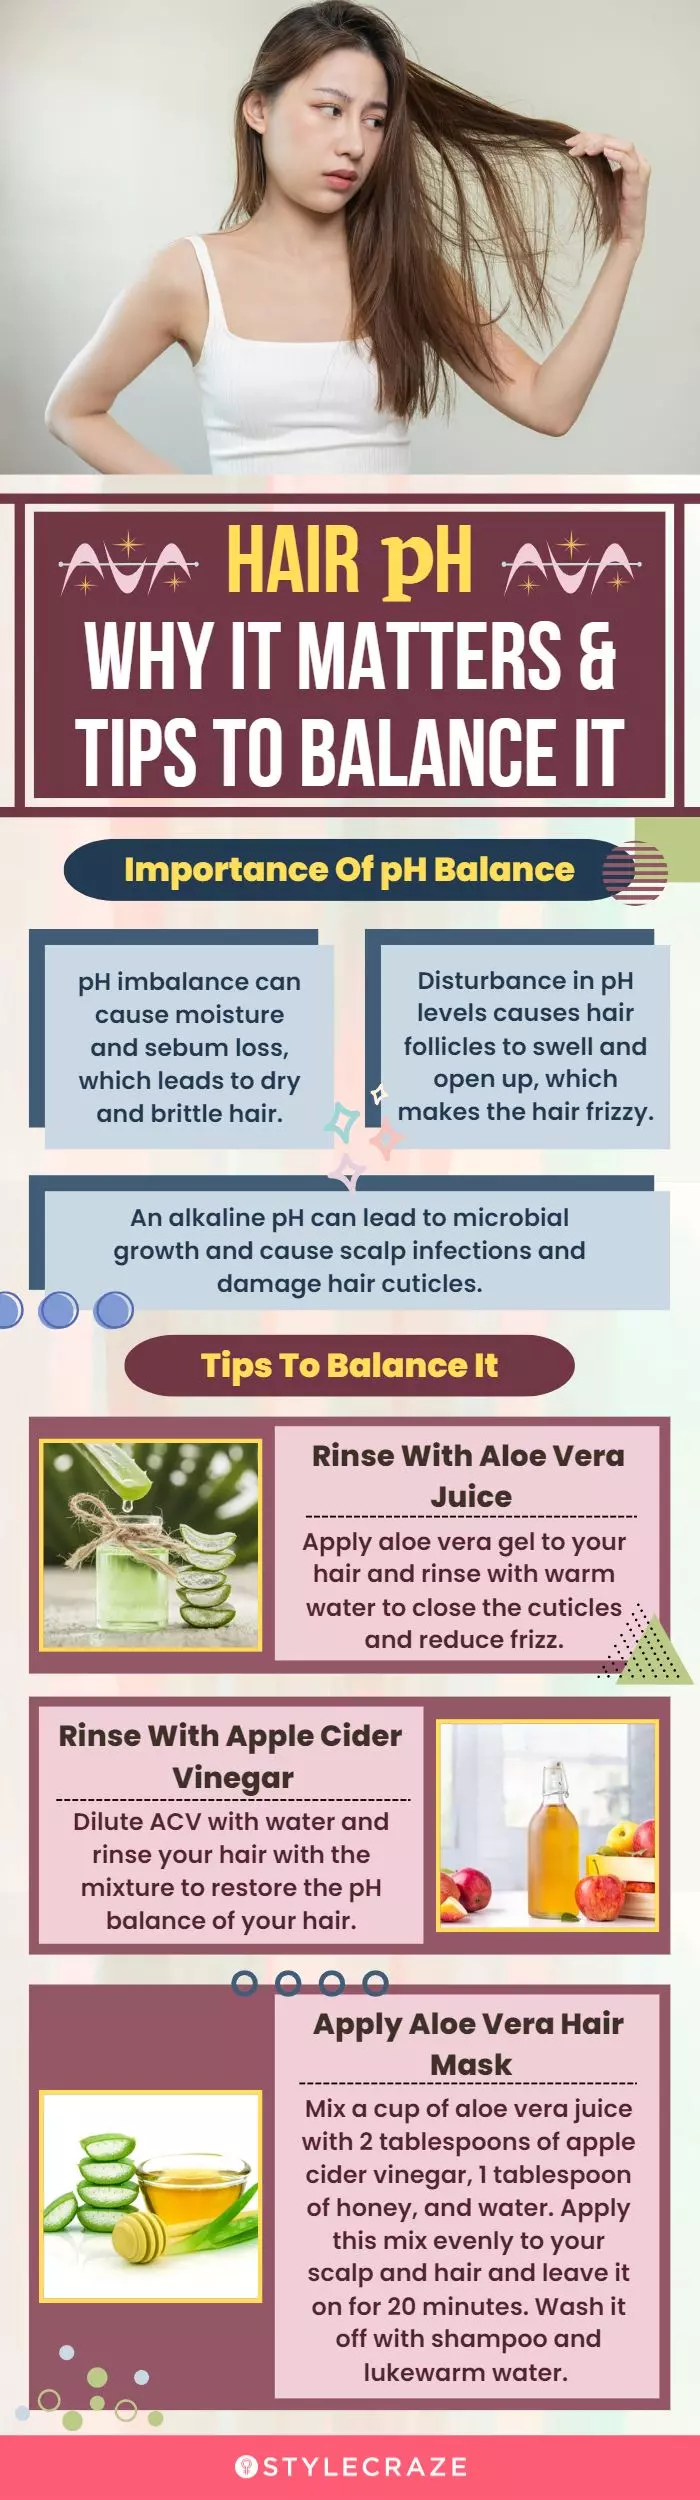 hair ph why it matters & tips to balance it (infographic)